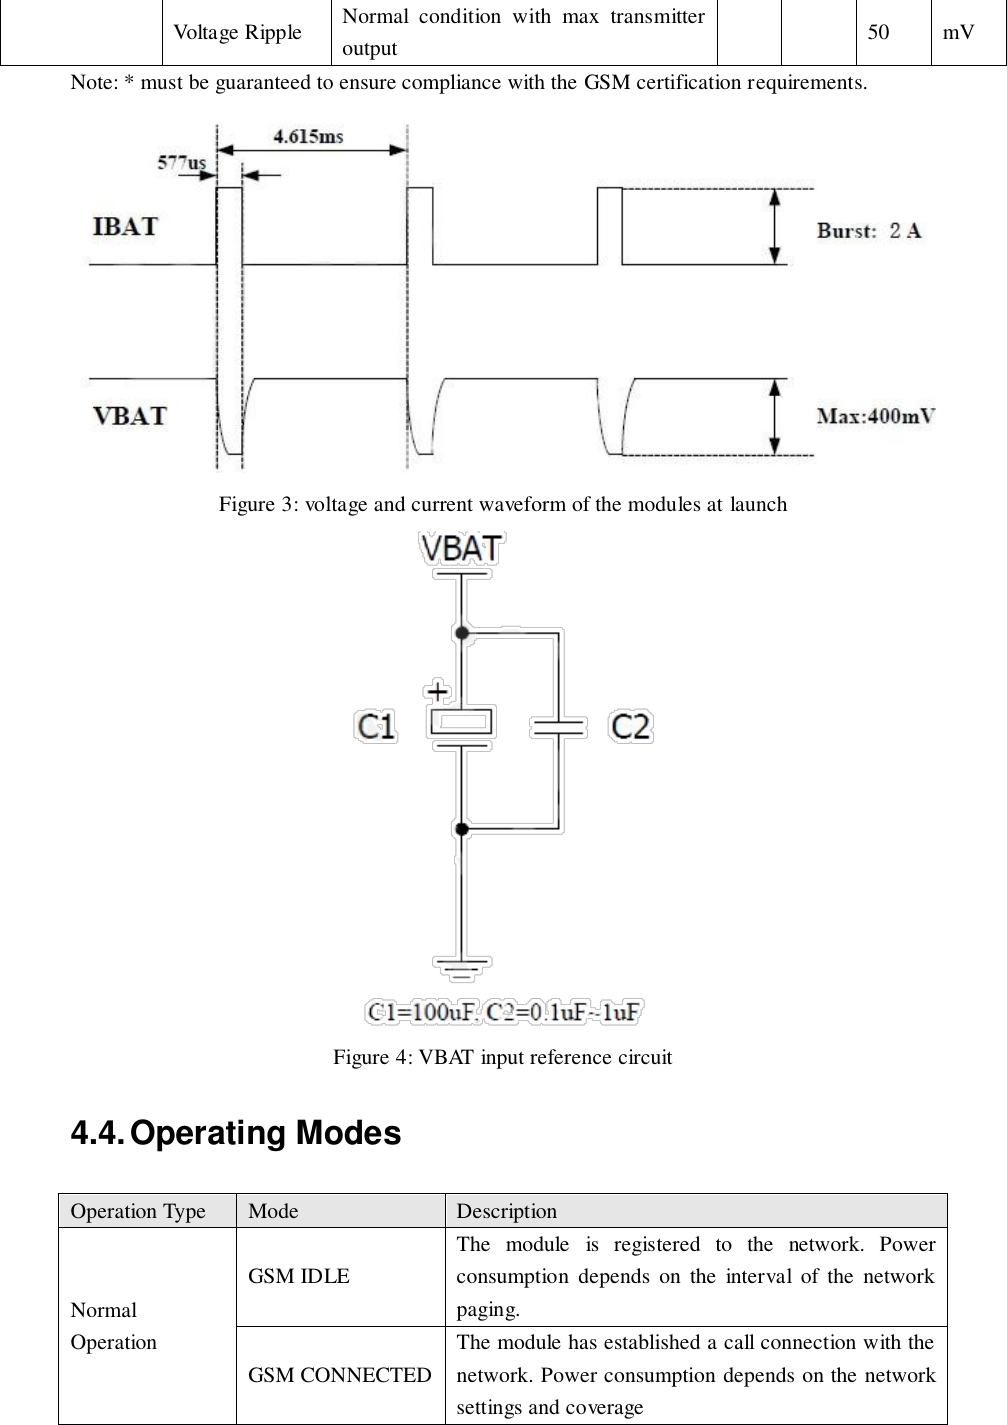 Note: * must be guaranteed to ensure compliance with the GSM certification requirements.  Figure 3: voltage and current waveform of the modules at launch  Figure 4: VBAT input reference circuit 4.4. Operating Modes Operation Type Mode Description Normal Operation GSM IDLE The  module  is  registered  to  the  network.  Power consumption  depends  on  the  interval  of the  network paging. GSM CONNECTED The module has established a call connection with the network. Power consumption depends on the network settings and coverage Voltage Ripple Normal  condition  with  max  transmitter output   50 mV 